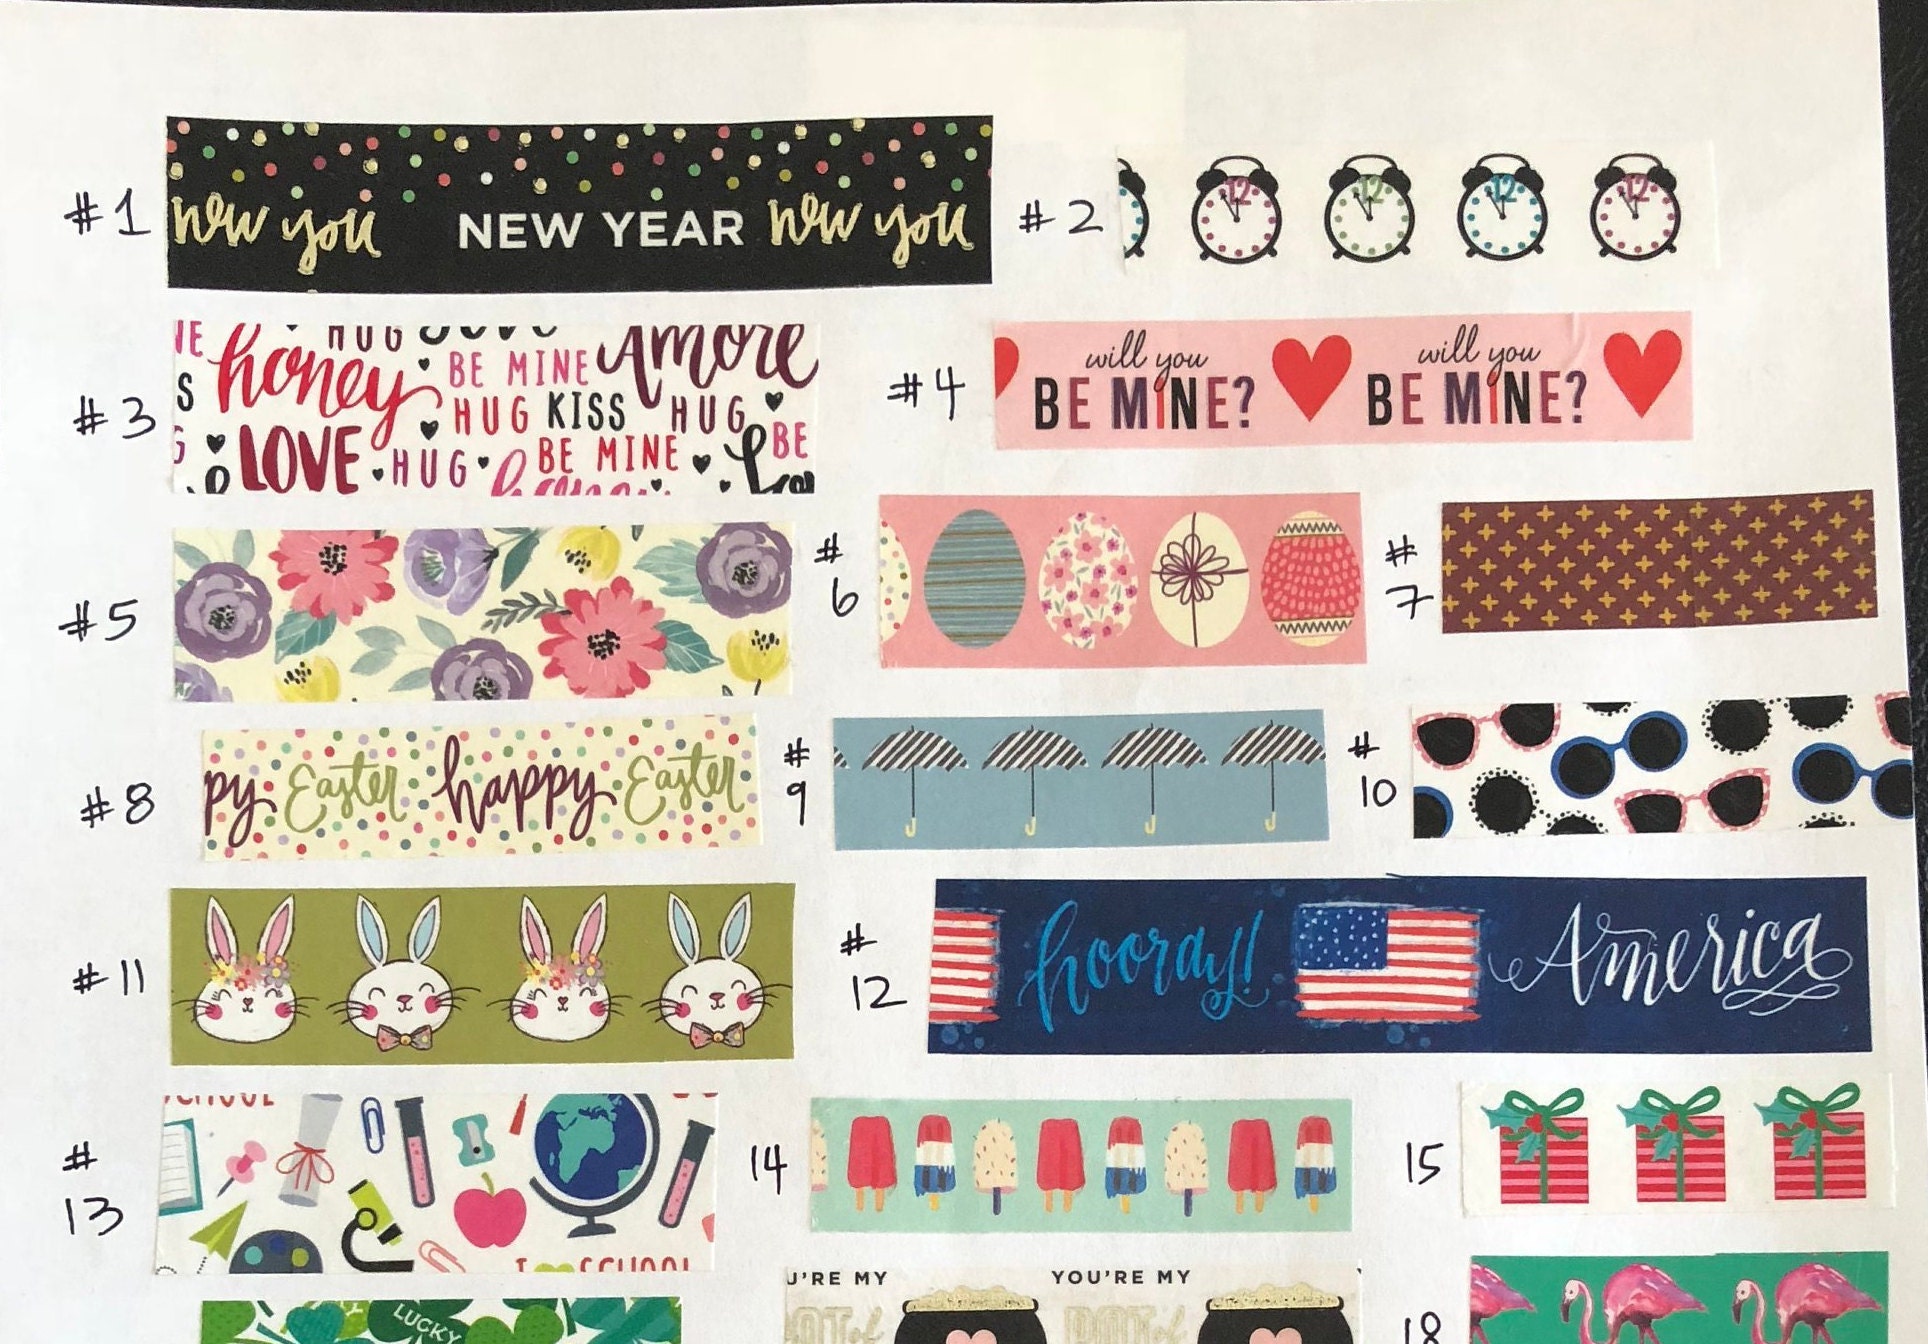 WS42B: Hello Kitty Washi Tape Samples, 18 Inches, Hawaii, Floral